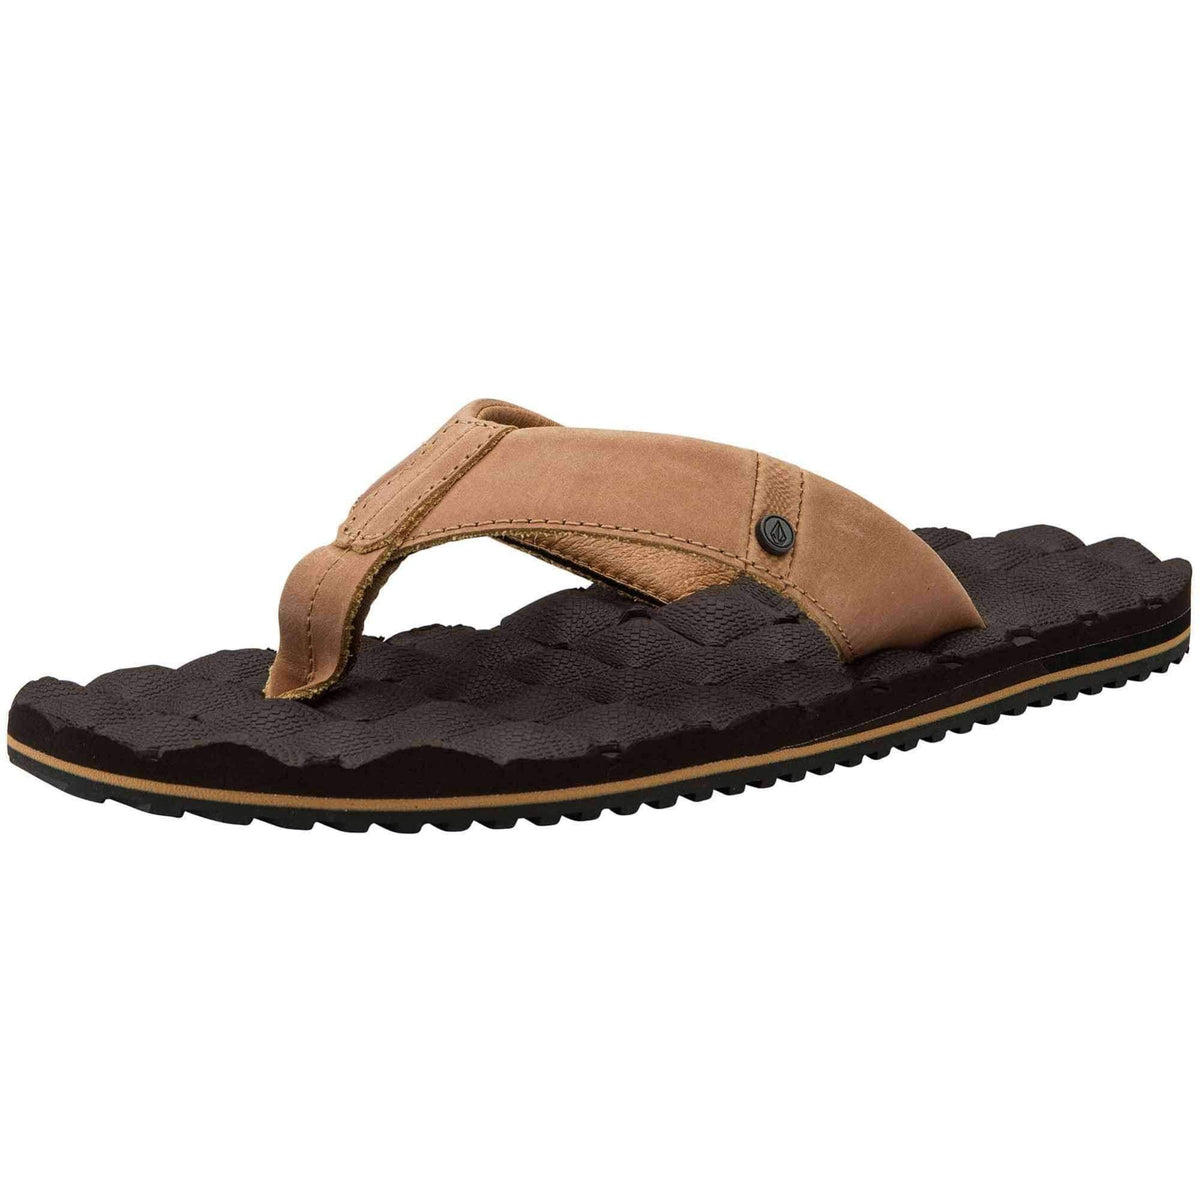 Volcom Recliner Leather Sandals in Brown Combo Mens Flip Flops by Volcom